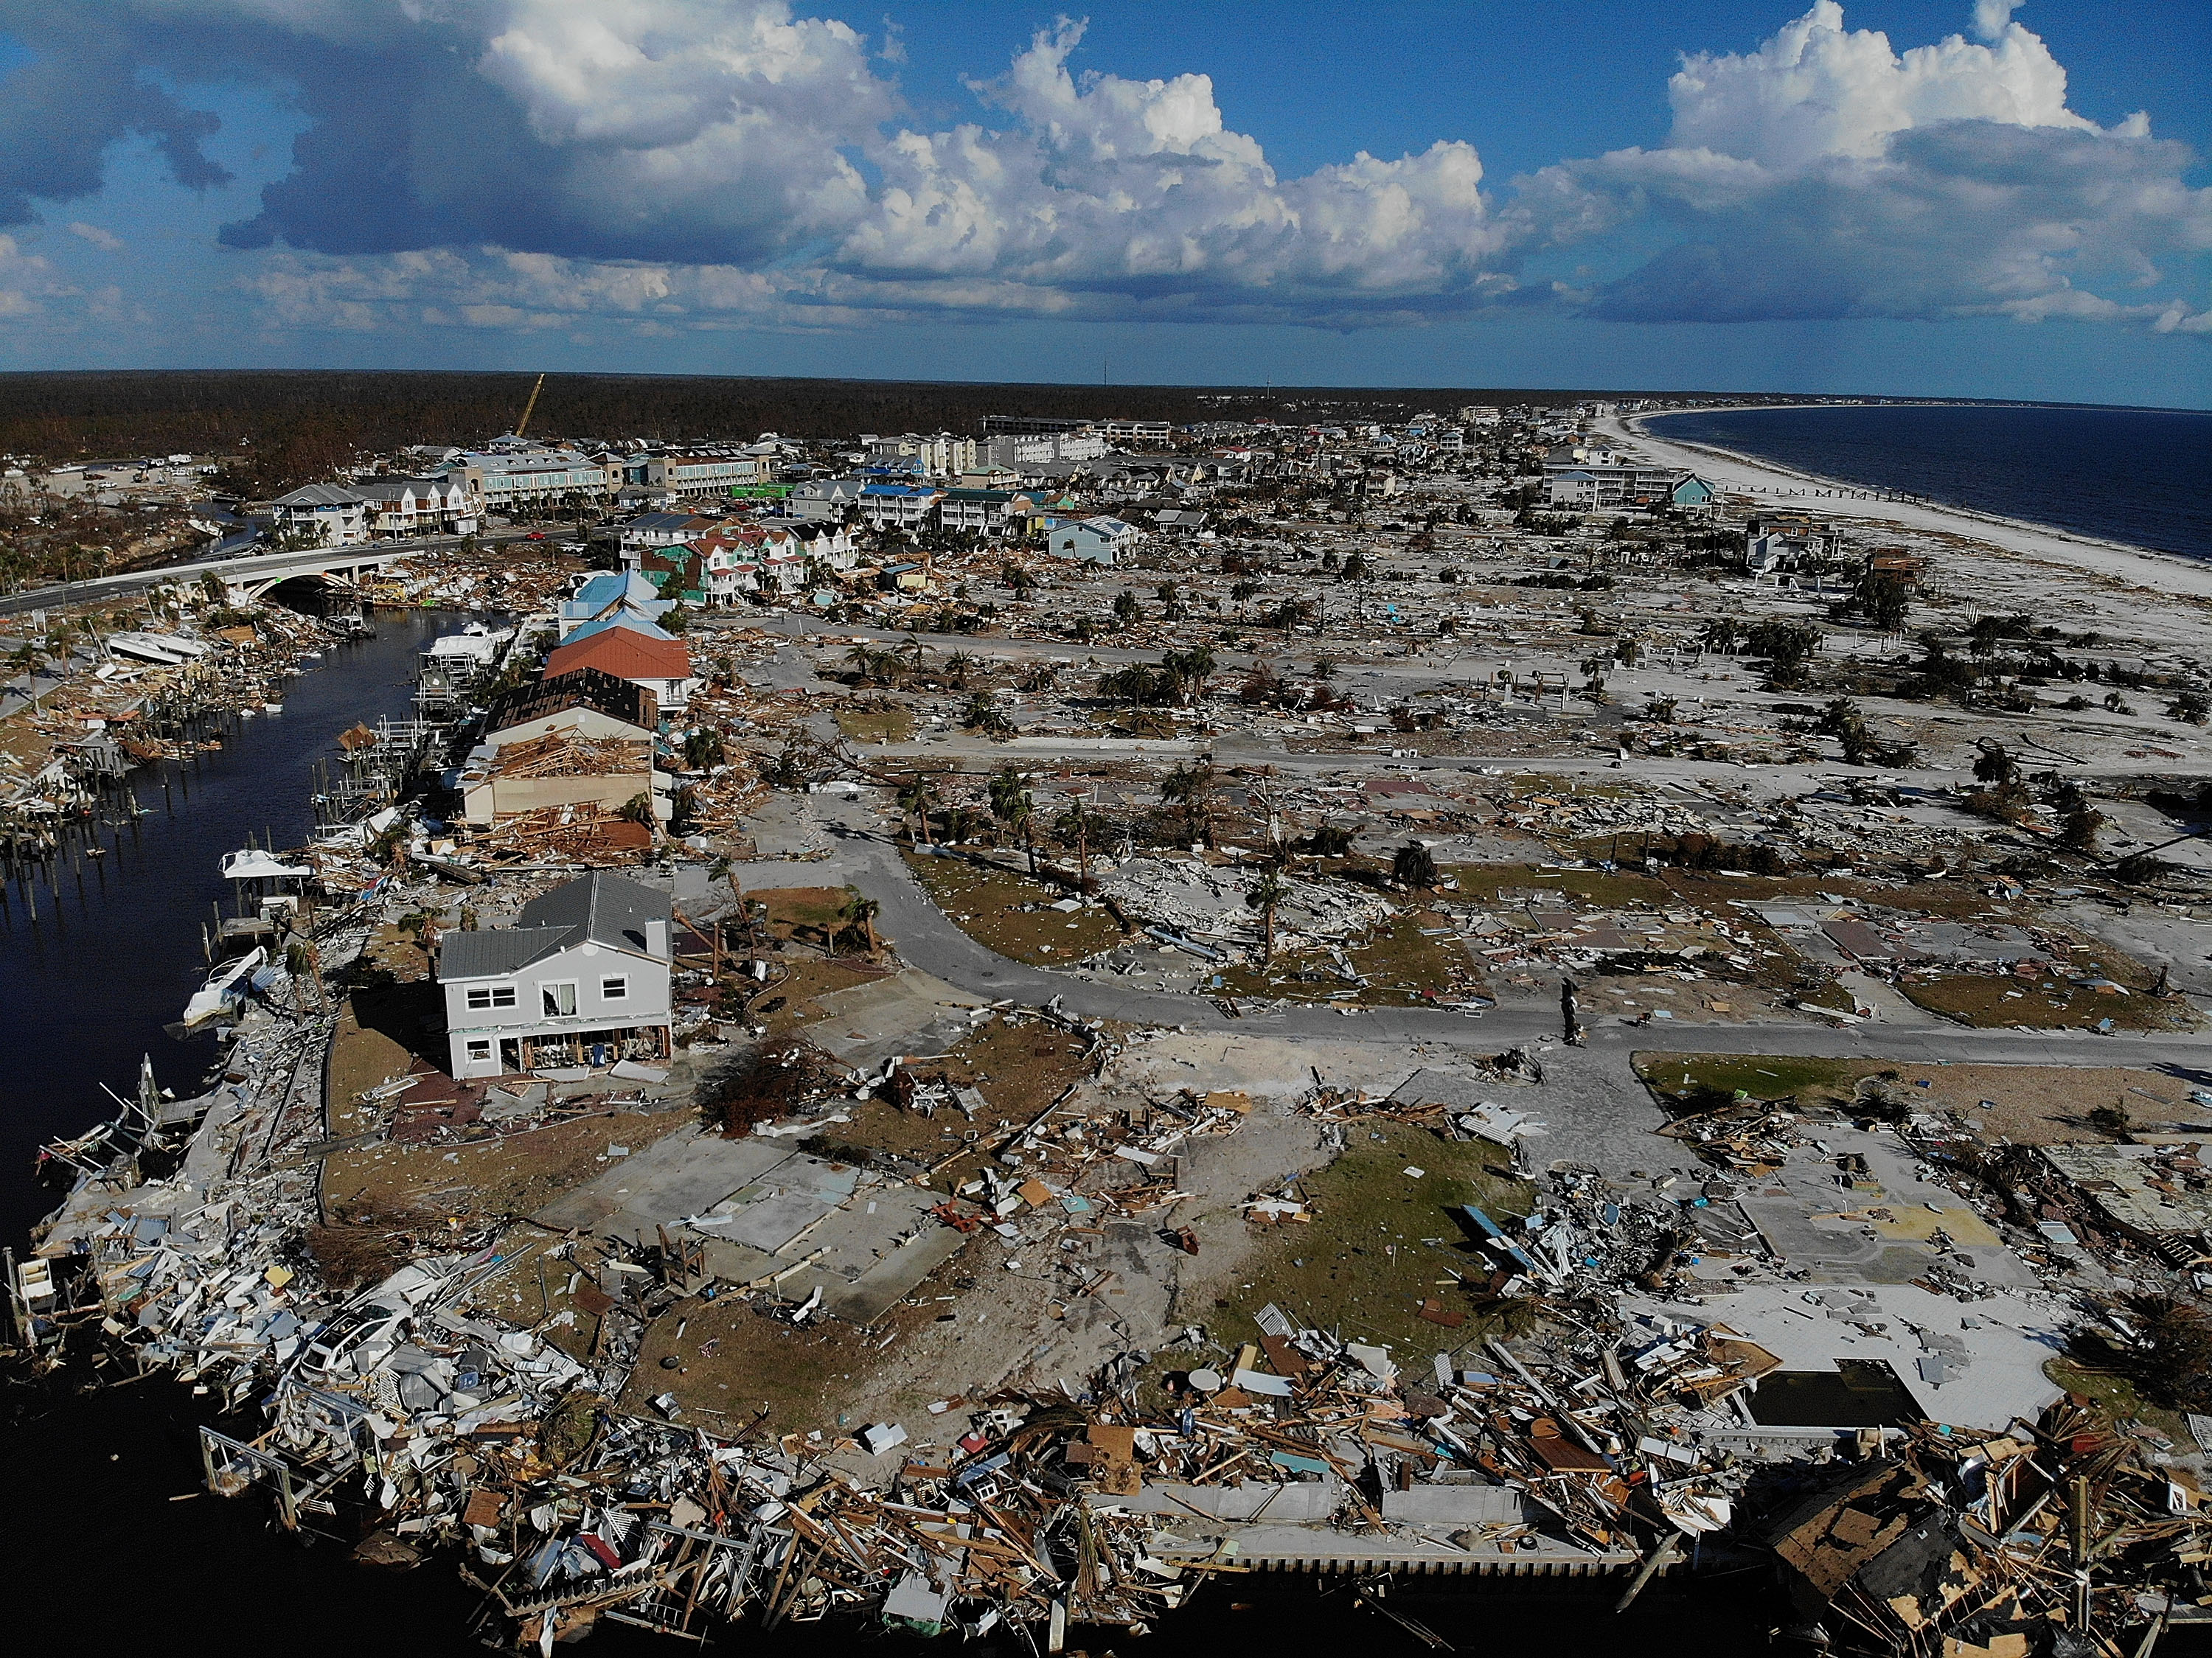 Blocks of homes in Mexico Beach, Florida, lie in rubble in Oct. 17, 2018, in the aftermath of Hurricane Michael. The storm hit on October 10 along the Florida Panhandle, causing massive damage and claiming the lives of more than a dozen people.